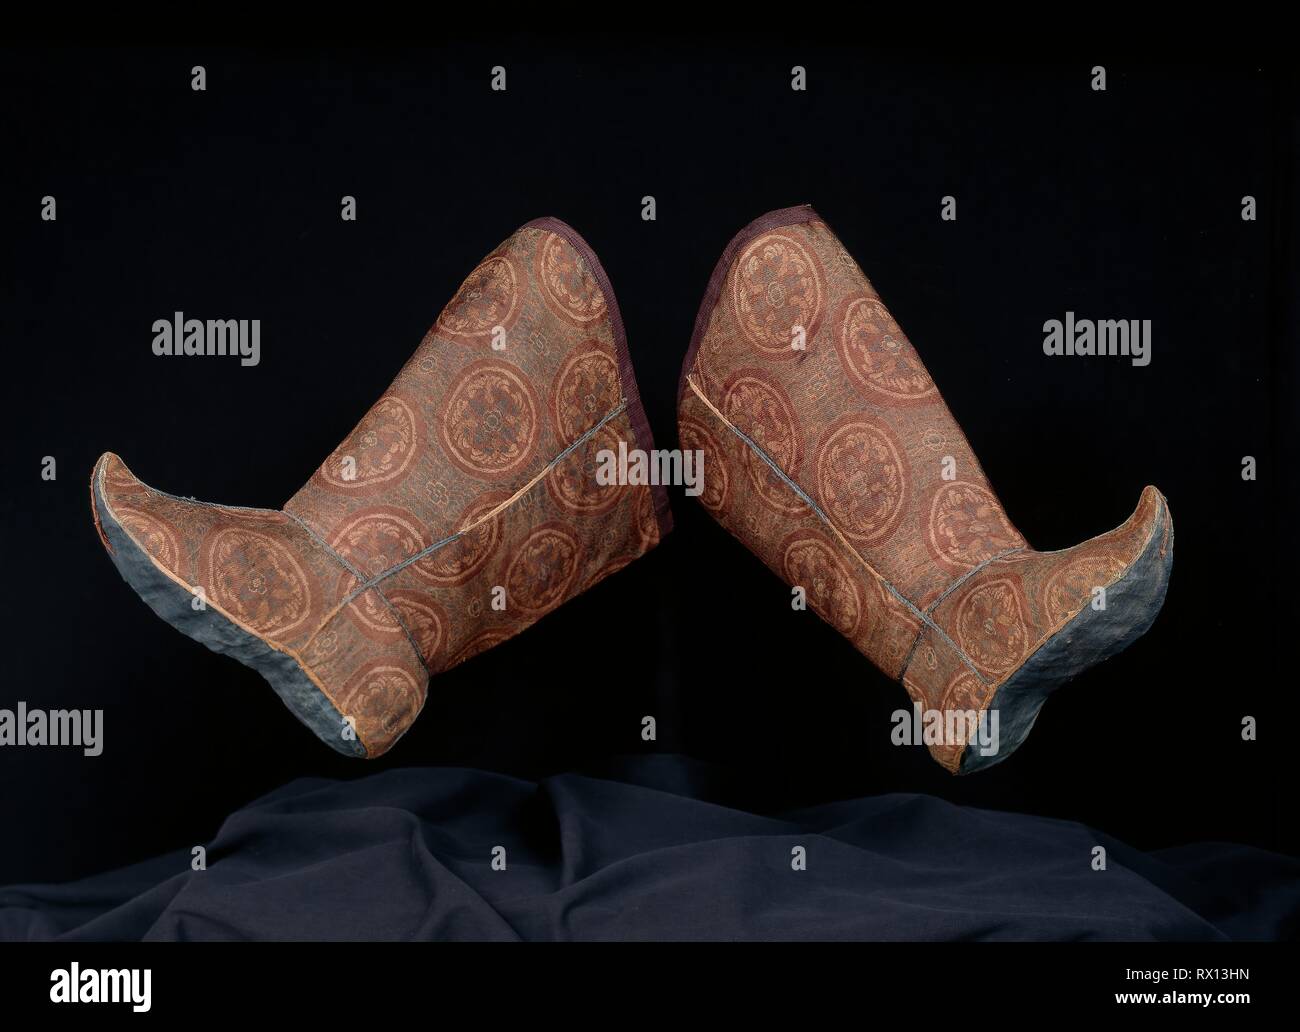 Pair of Woman's Boots with Tying Ribbon. China. Date: 900 AD-1000. Dimensions: a: 40 × 29.2 cm (15 3/4 × 11 1/2 in.)  b: 39.2 × 28.6 cm (15 3/8 × 11 1/4 in.)  Repeat: 13.2-14 × 12 cm (5 1/8-5 1/2 × 4 3/4 in.)  c (ribbon): 1.45 × 60.8 cm (5/8 × 24 in.). Outer boot: silk, complementary weft twill weave with inner warps; seam trim cord: silk, oblique interlacing; ribbon and top boot edge binding: silk, simple and complex gauze weave; lined with silk, plain weave; lining's upper edge facing: silk, twill damask weave; sole: silk, plain weave; tying ribbon: twill weave self-patterned by areas of twi Stock Photo